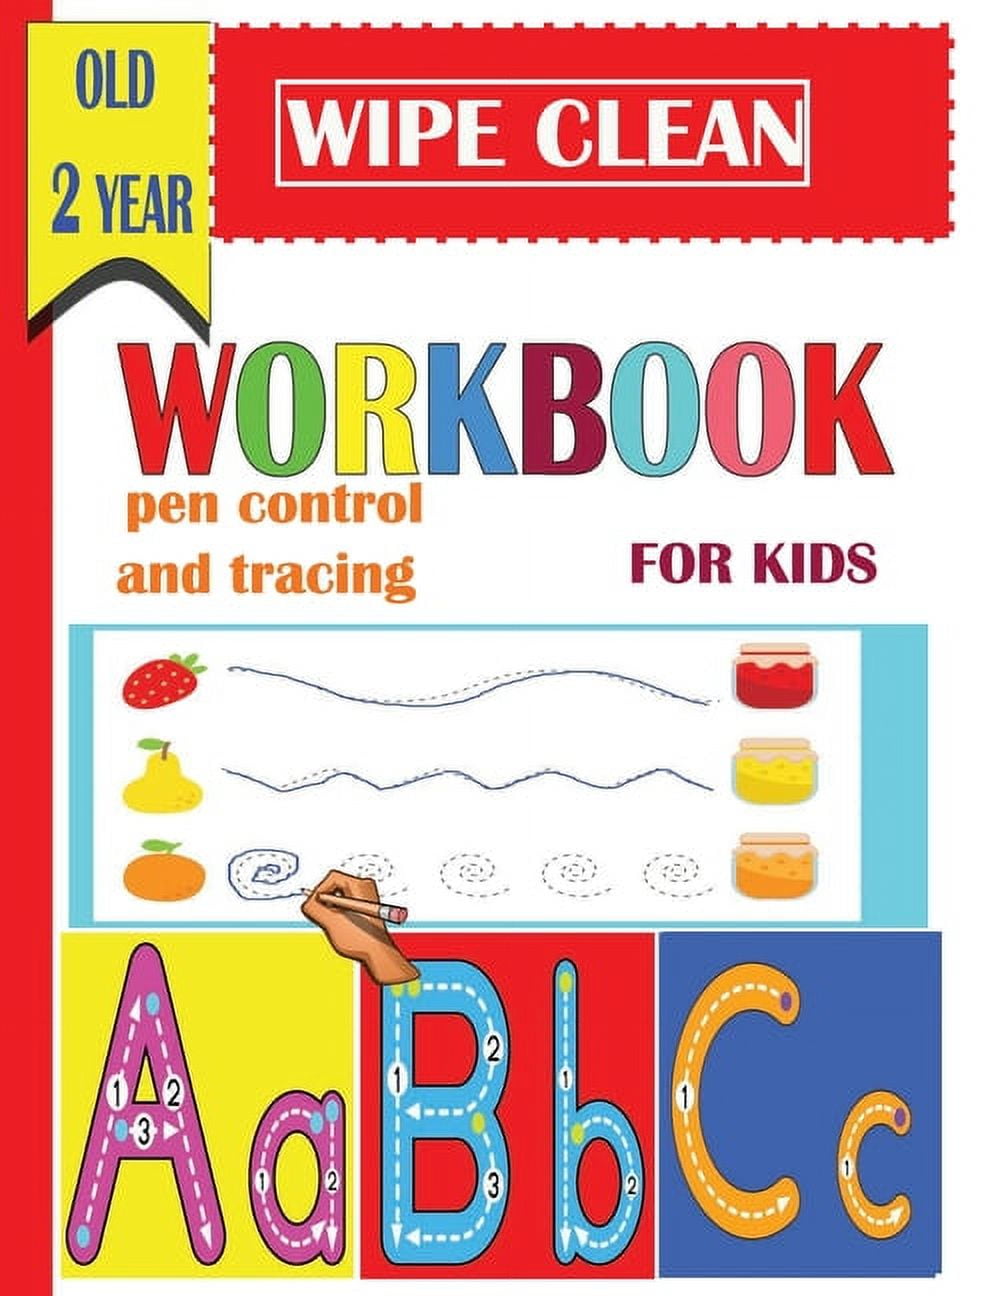 hand2mind Bob Books Alphabet Skills Water Workbook Set, Water Pen Coloring Books for Toddlers